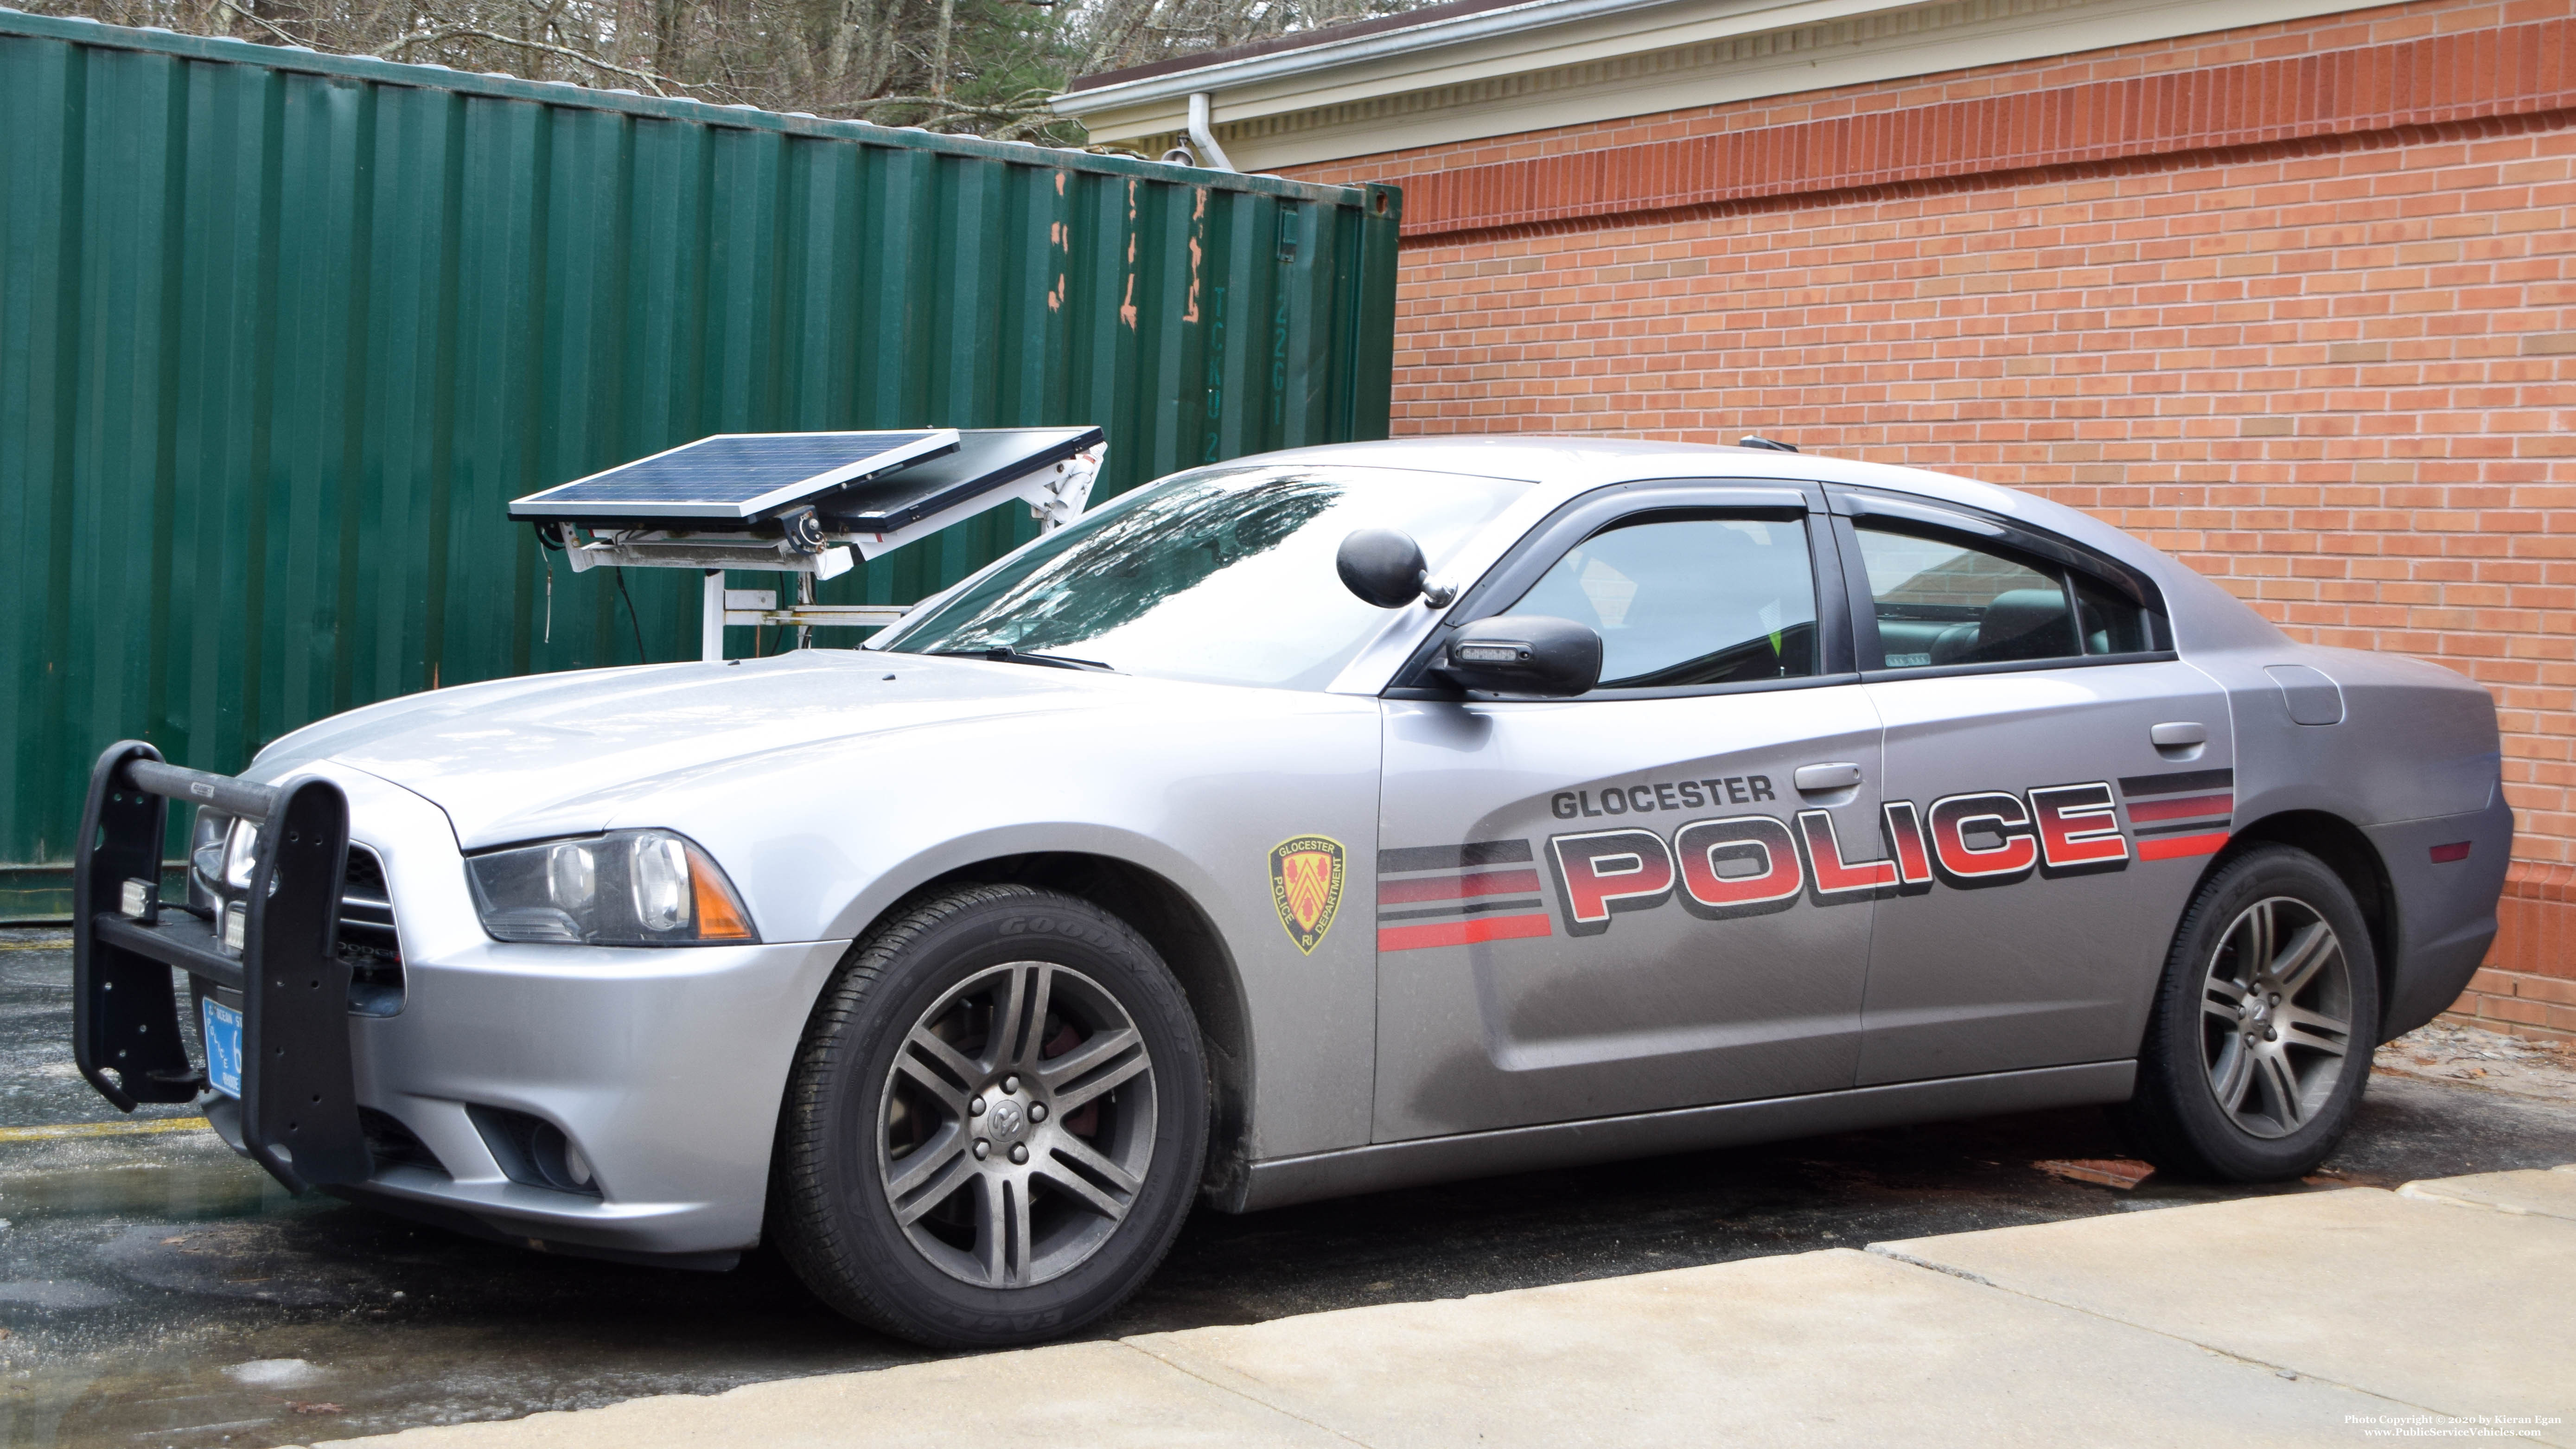 A photo  of Glocester Police
            Cruiser 632, a 2014 Dodge Charger             taken by Kieran Egan